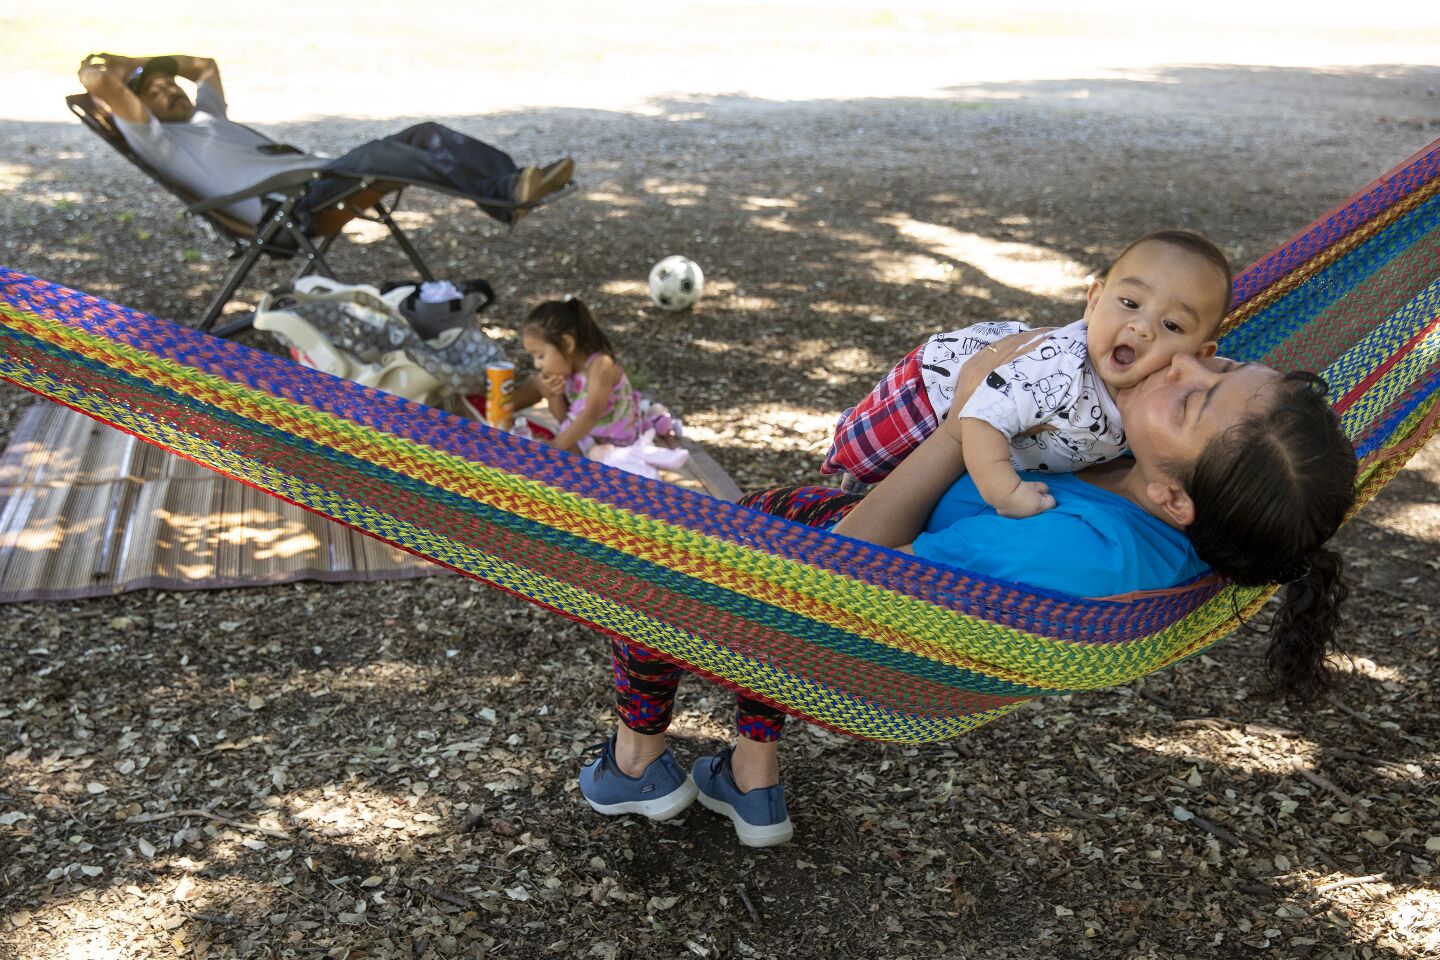 A mother and son play in a hammock at Woodley Park in Van Nuys.